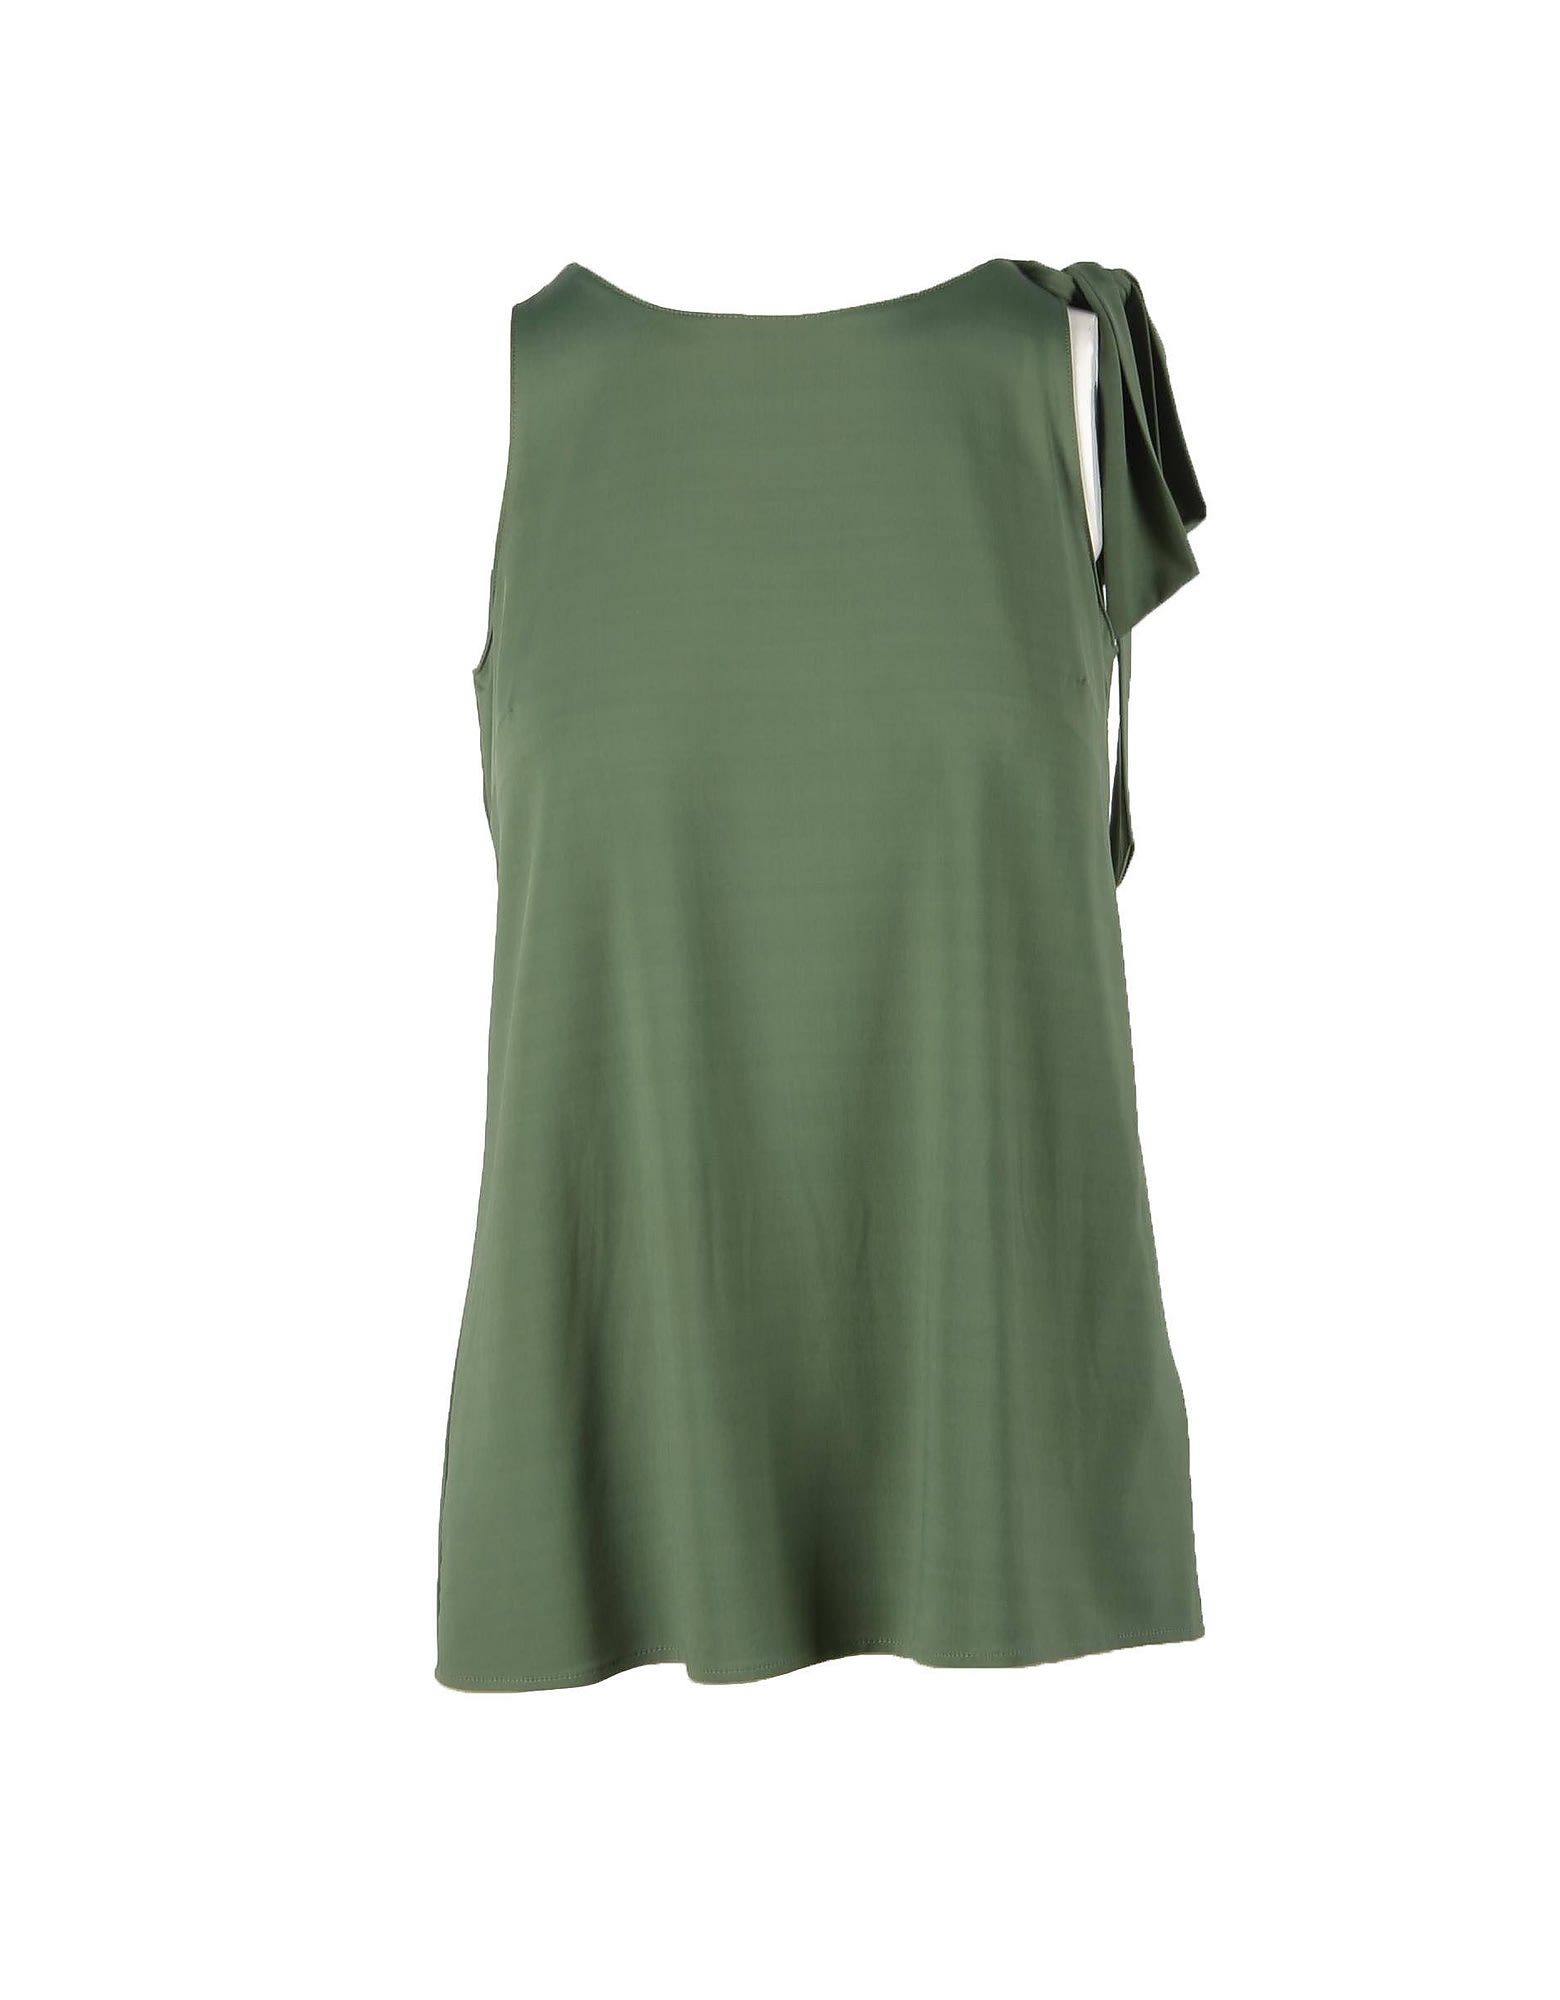 One Womens Green Top